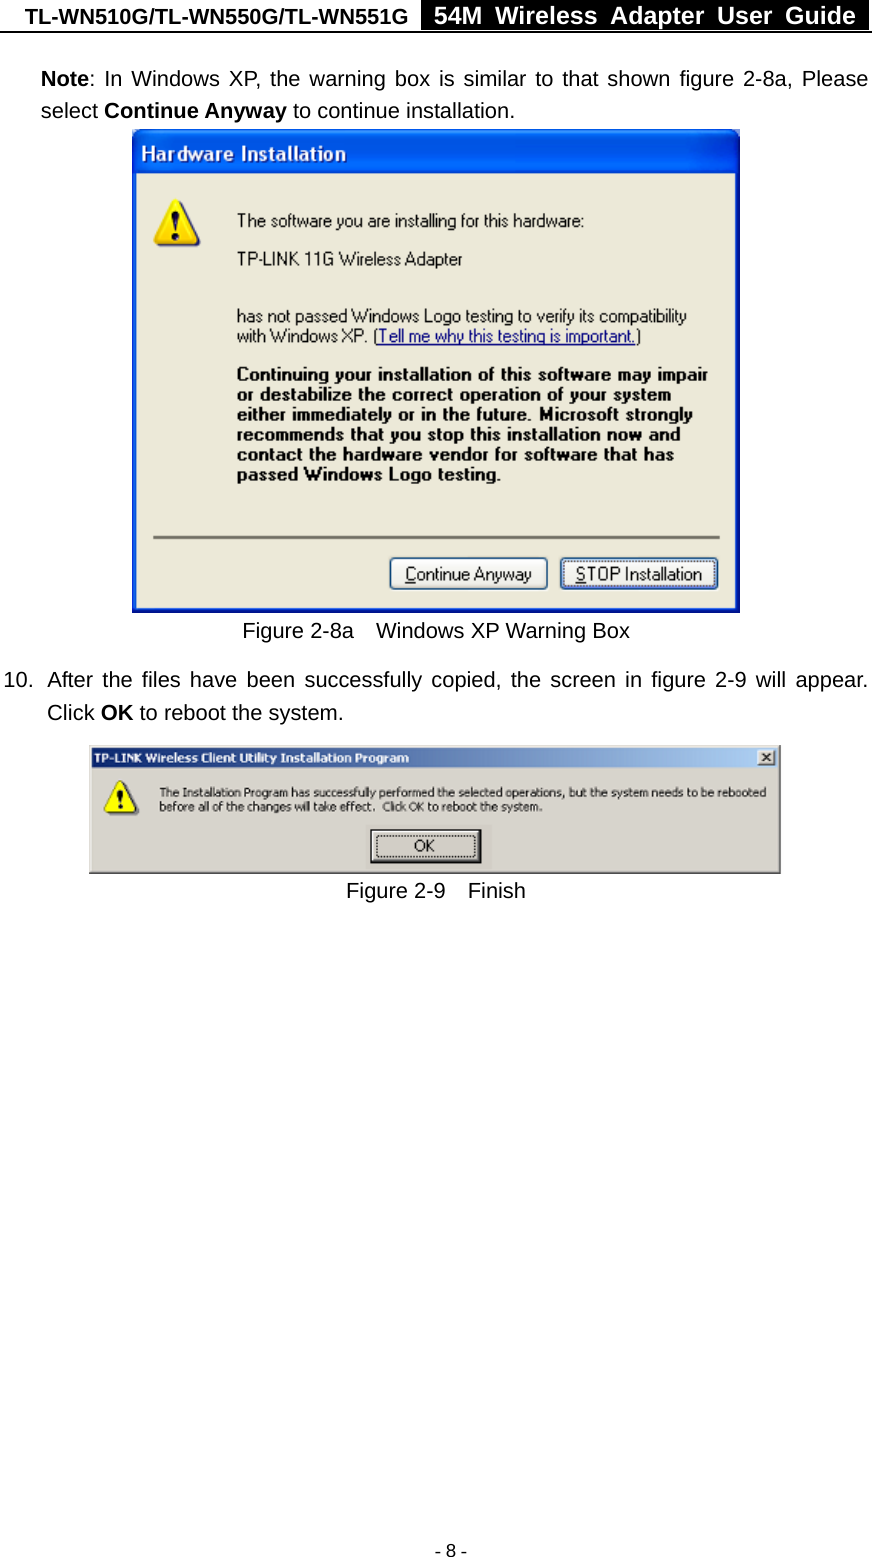 TL-WN510G/TL-WN550G/TL-WN551G  54M Wireless Adapter User Guide   - 8 -Note: In Windows XP, the warning box is similar to that shown figure 2-8a, Please select Continue Anyway to continue installation.  Figure 2-8a    Windows XP Warning Box 10.  After the files have been successfully copied, the screen in figure 2-9 will appear. Click OK to reboot the system.  Figure 2-9  Finish   